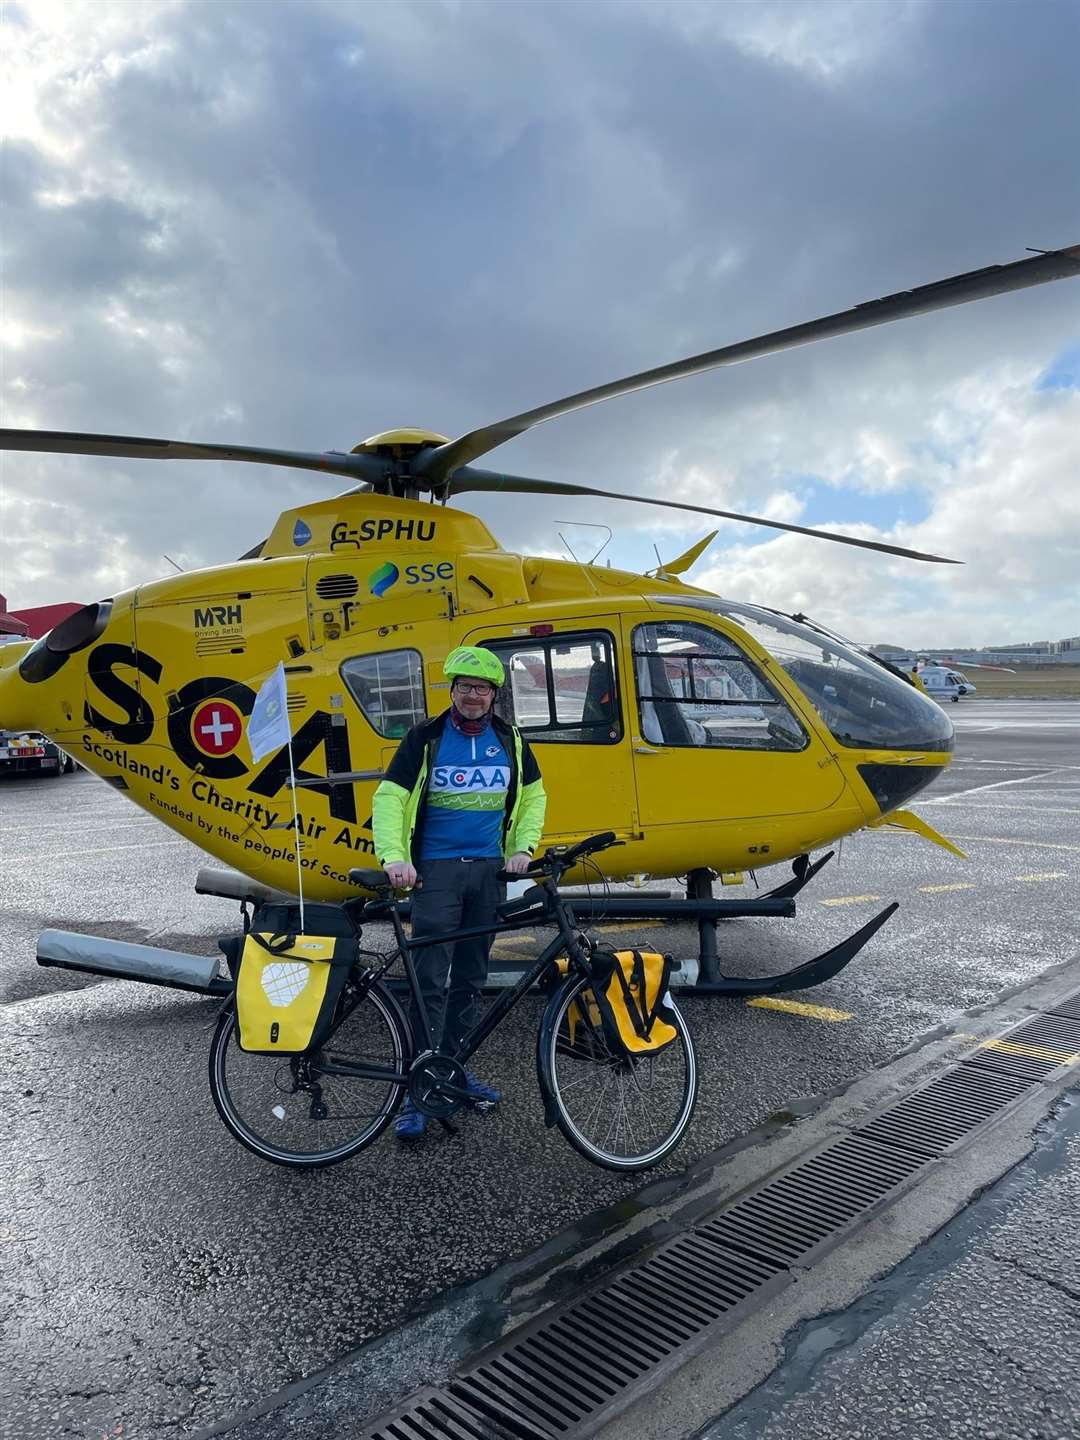 As a GP Barry Watt knows the value of Scotland's Charity Air Ambulance in an emergency.